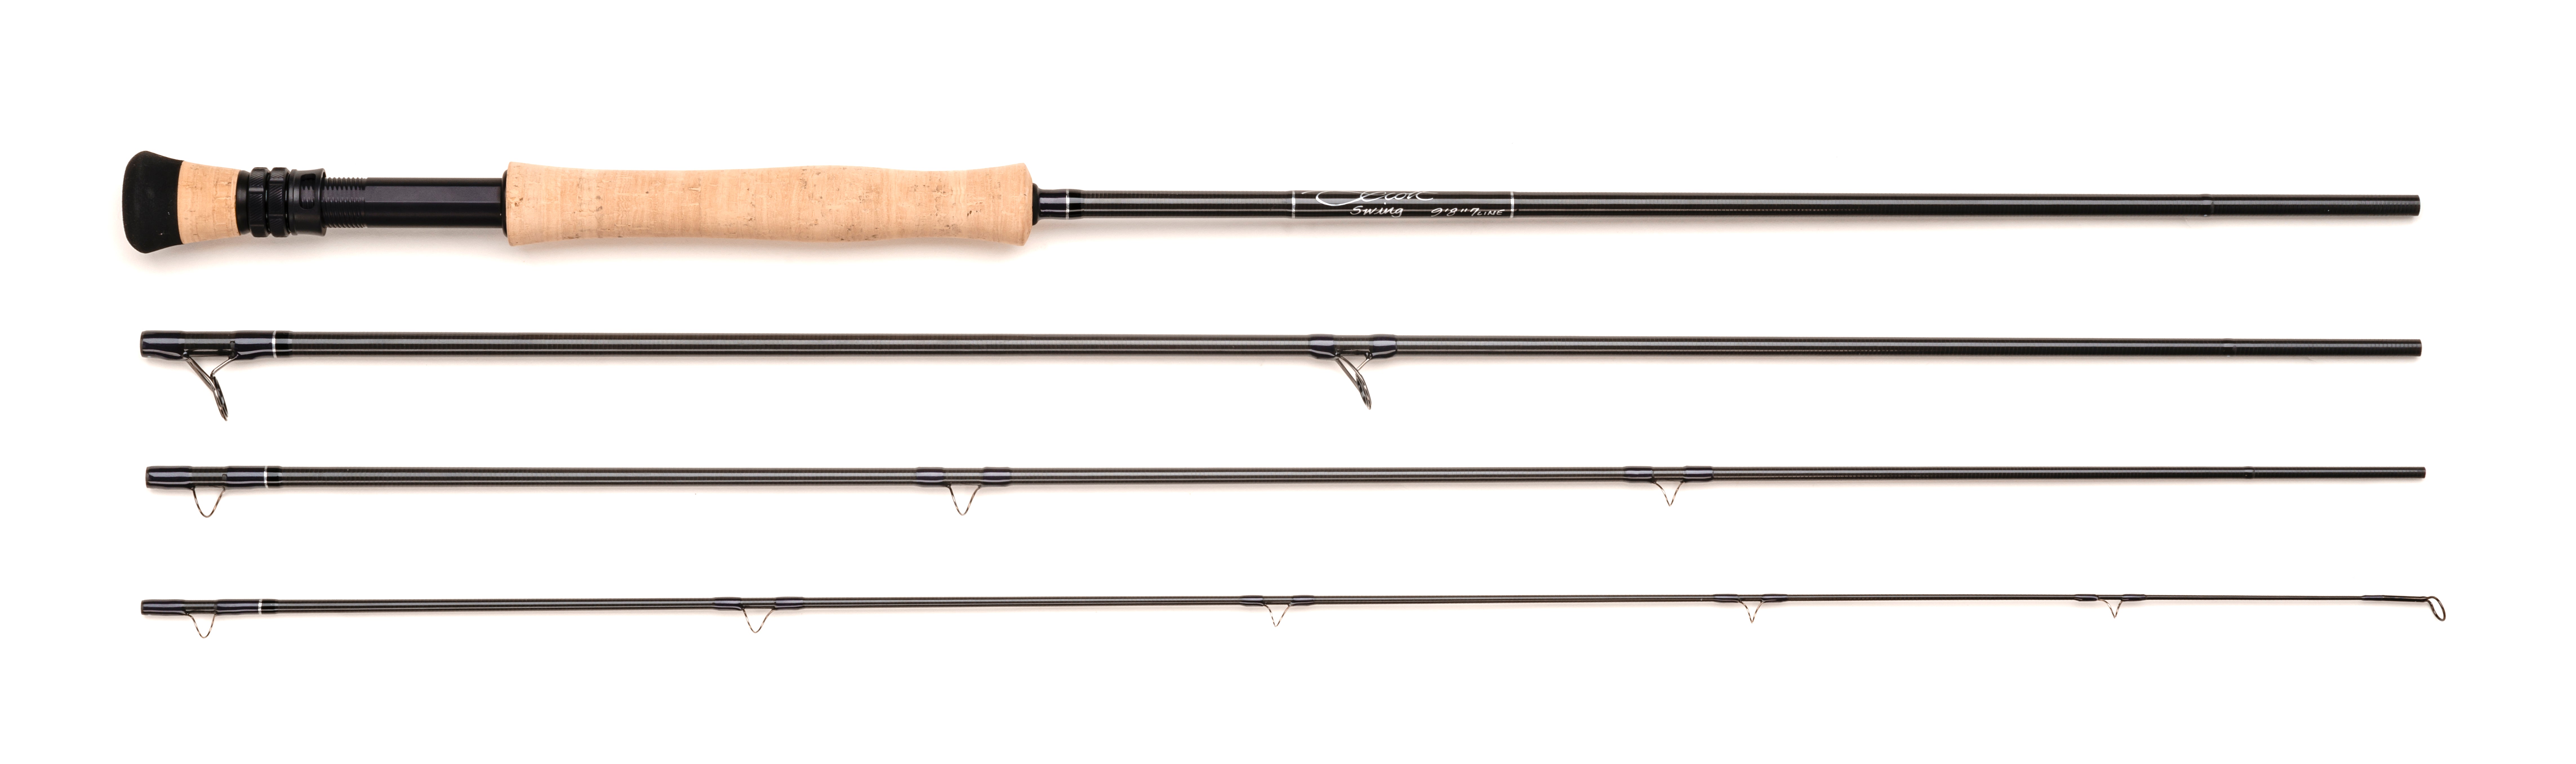 Sea Run Cases // Norfork QR Expedition Fly Fishing Rod & Reel